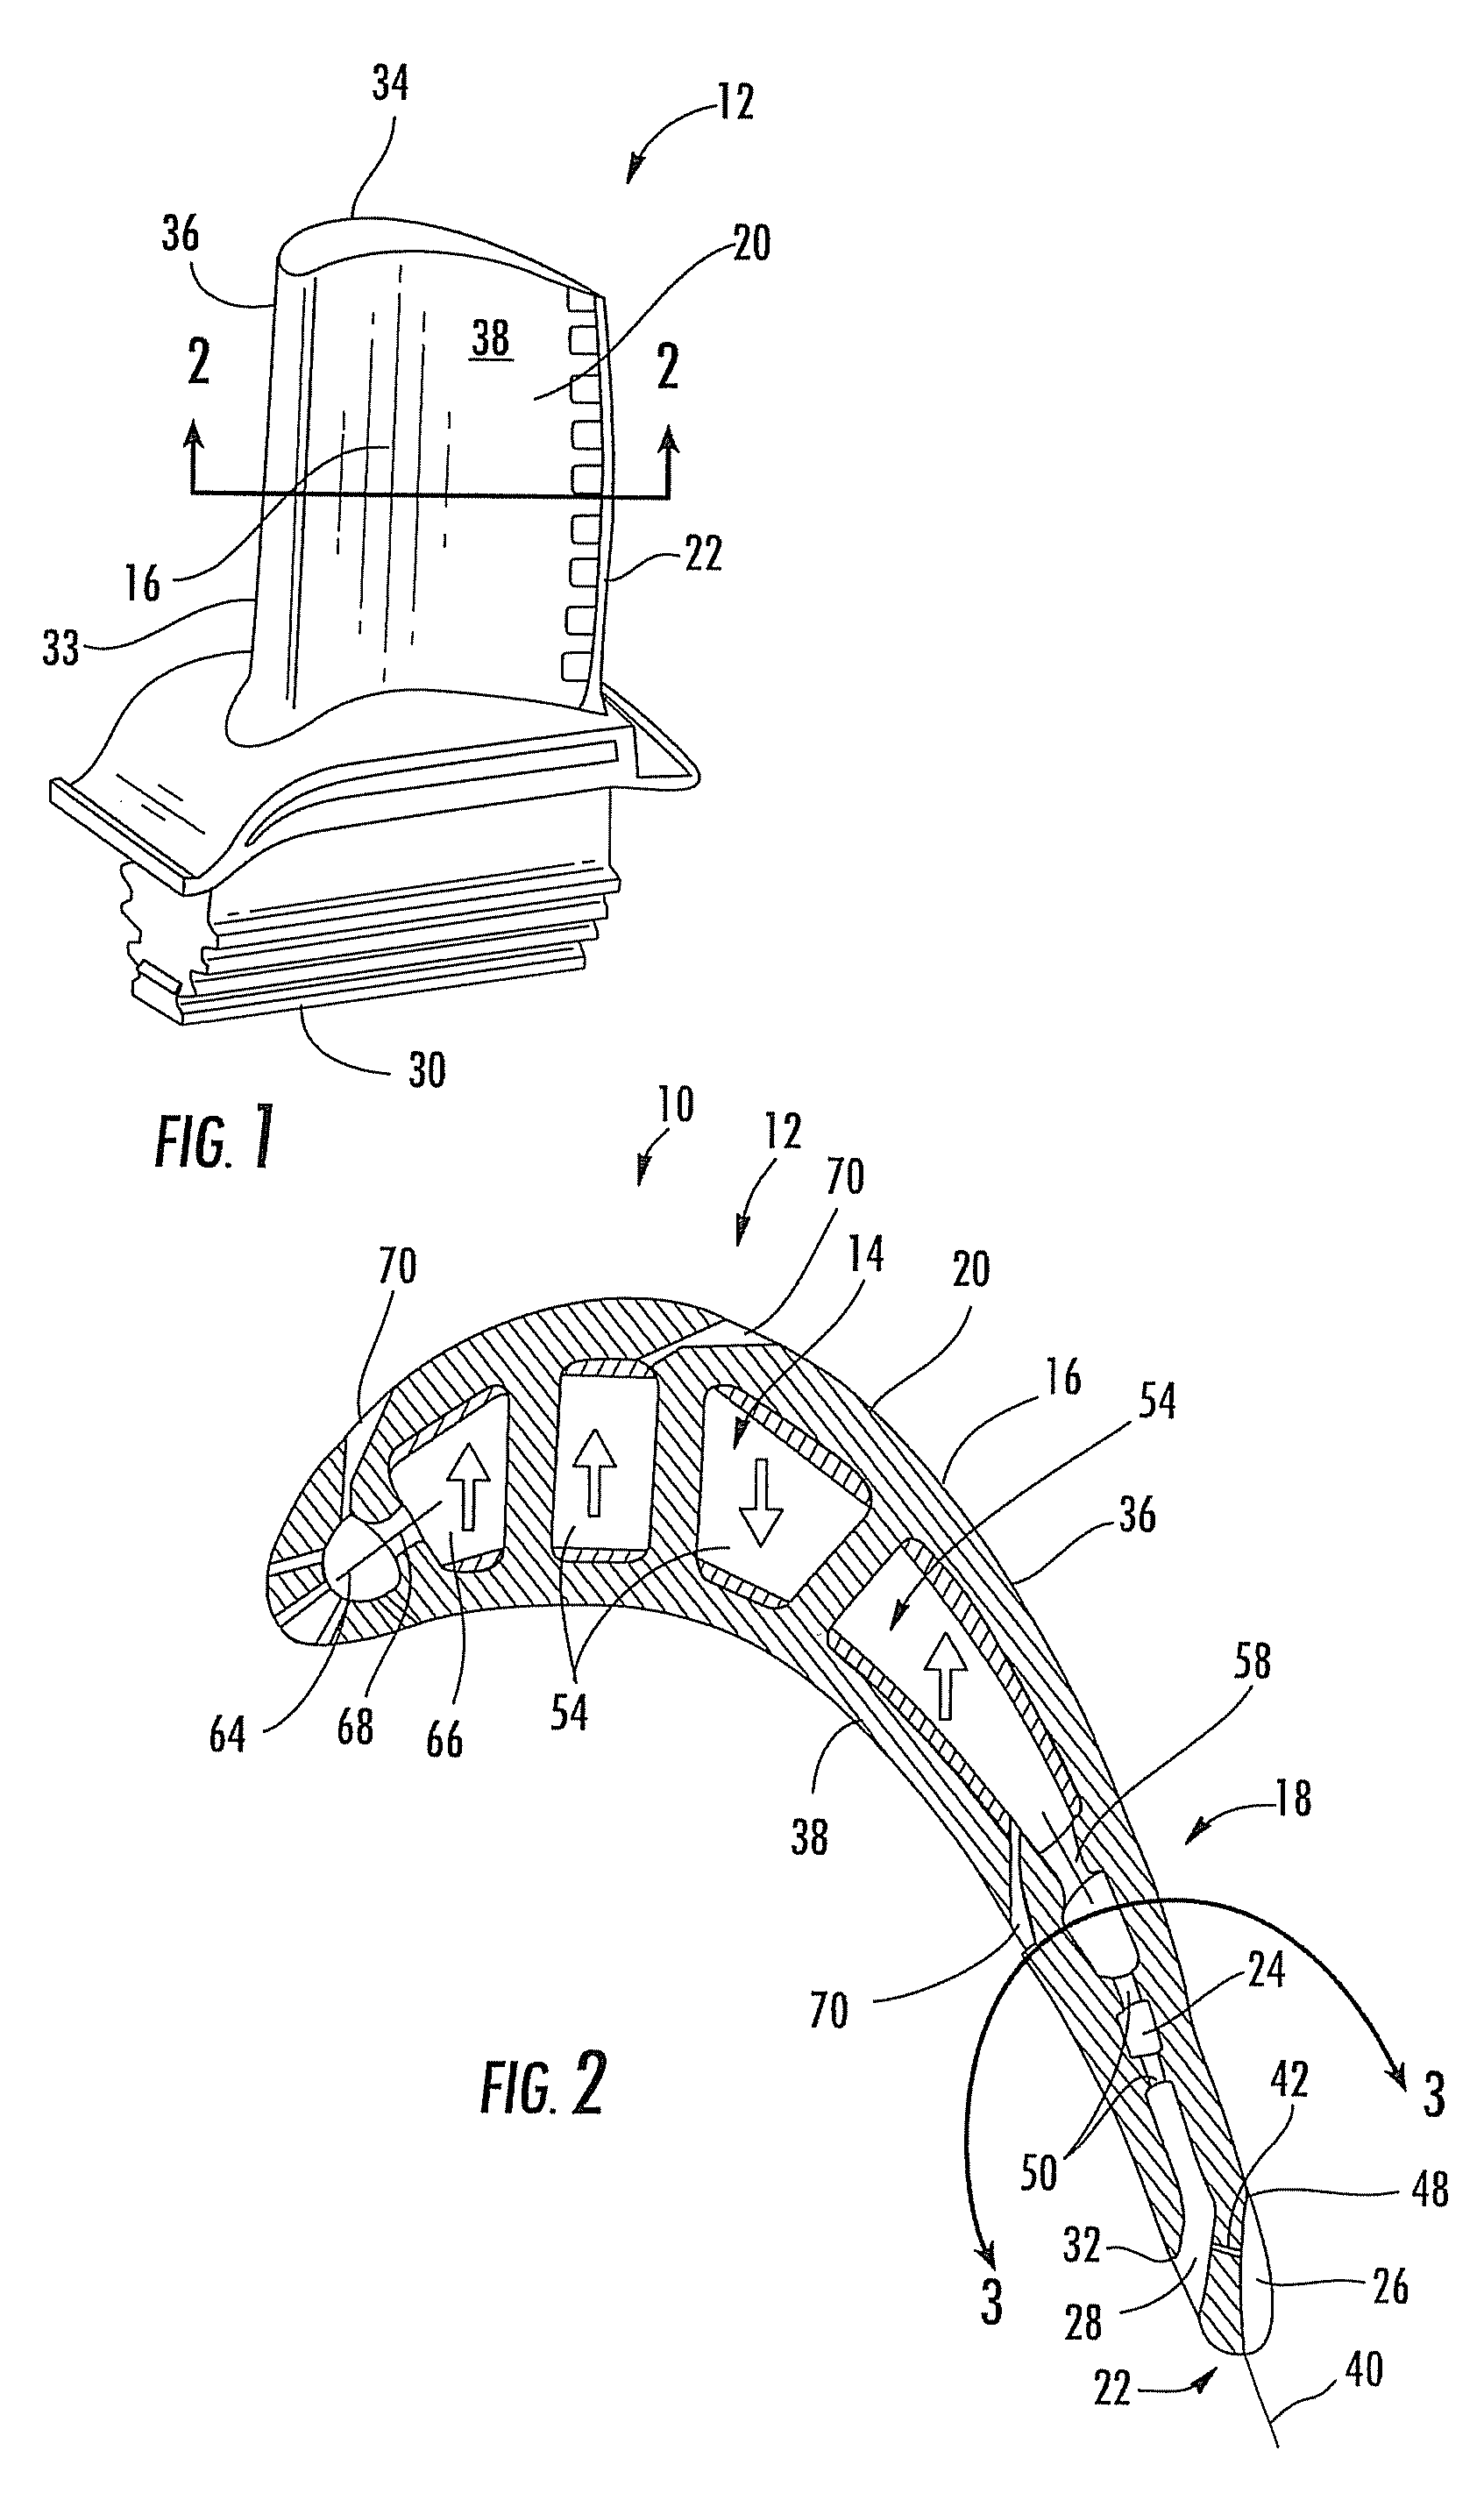 Turbine blade with multiple trailing edge cooling slots